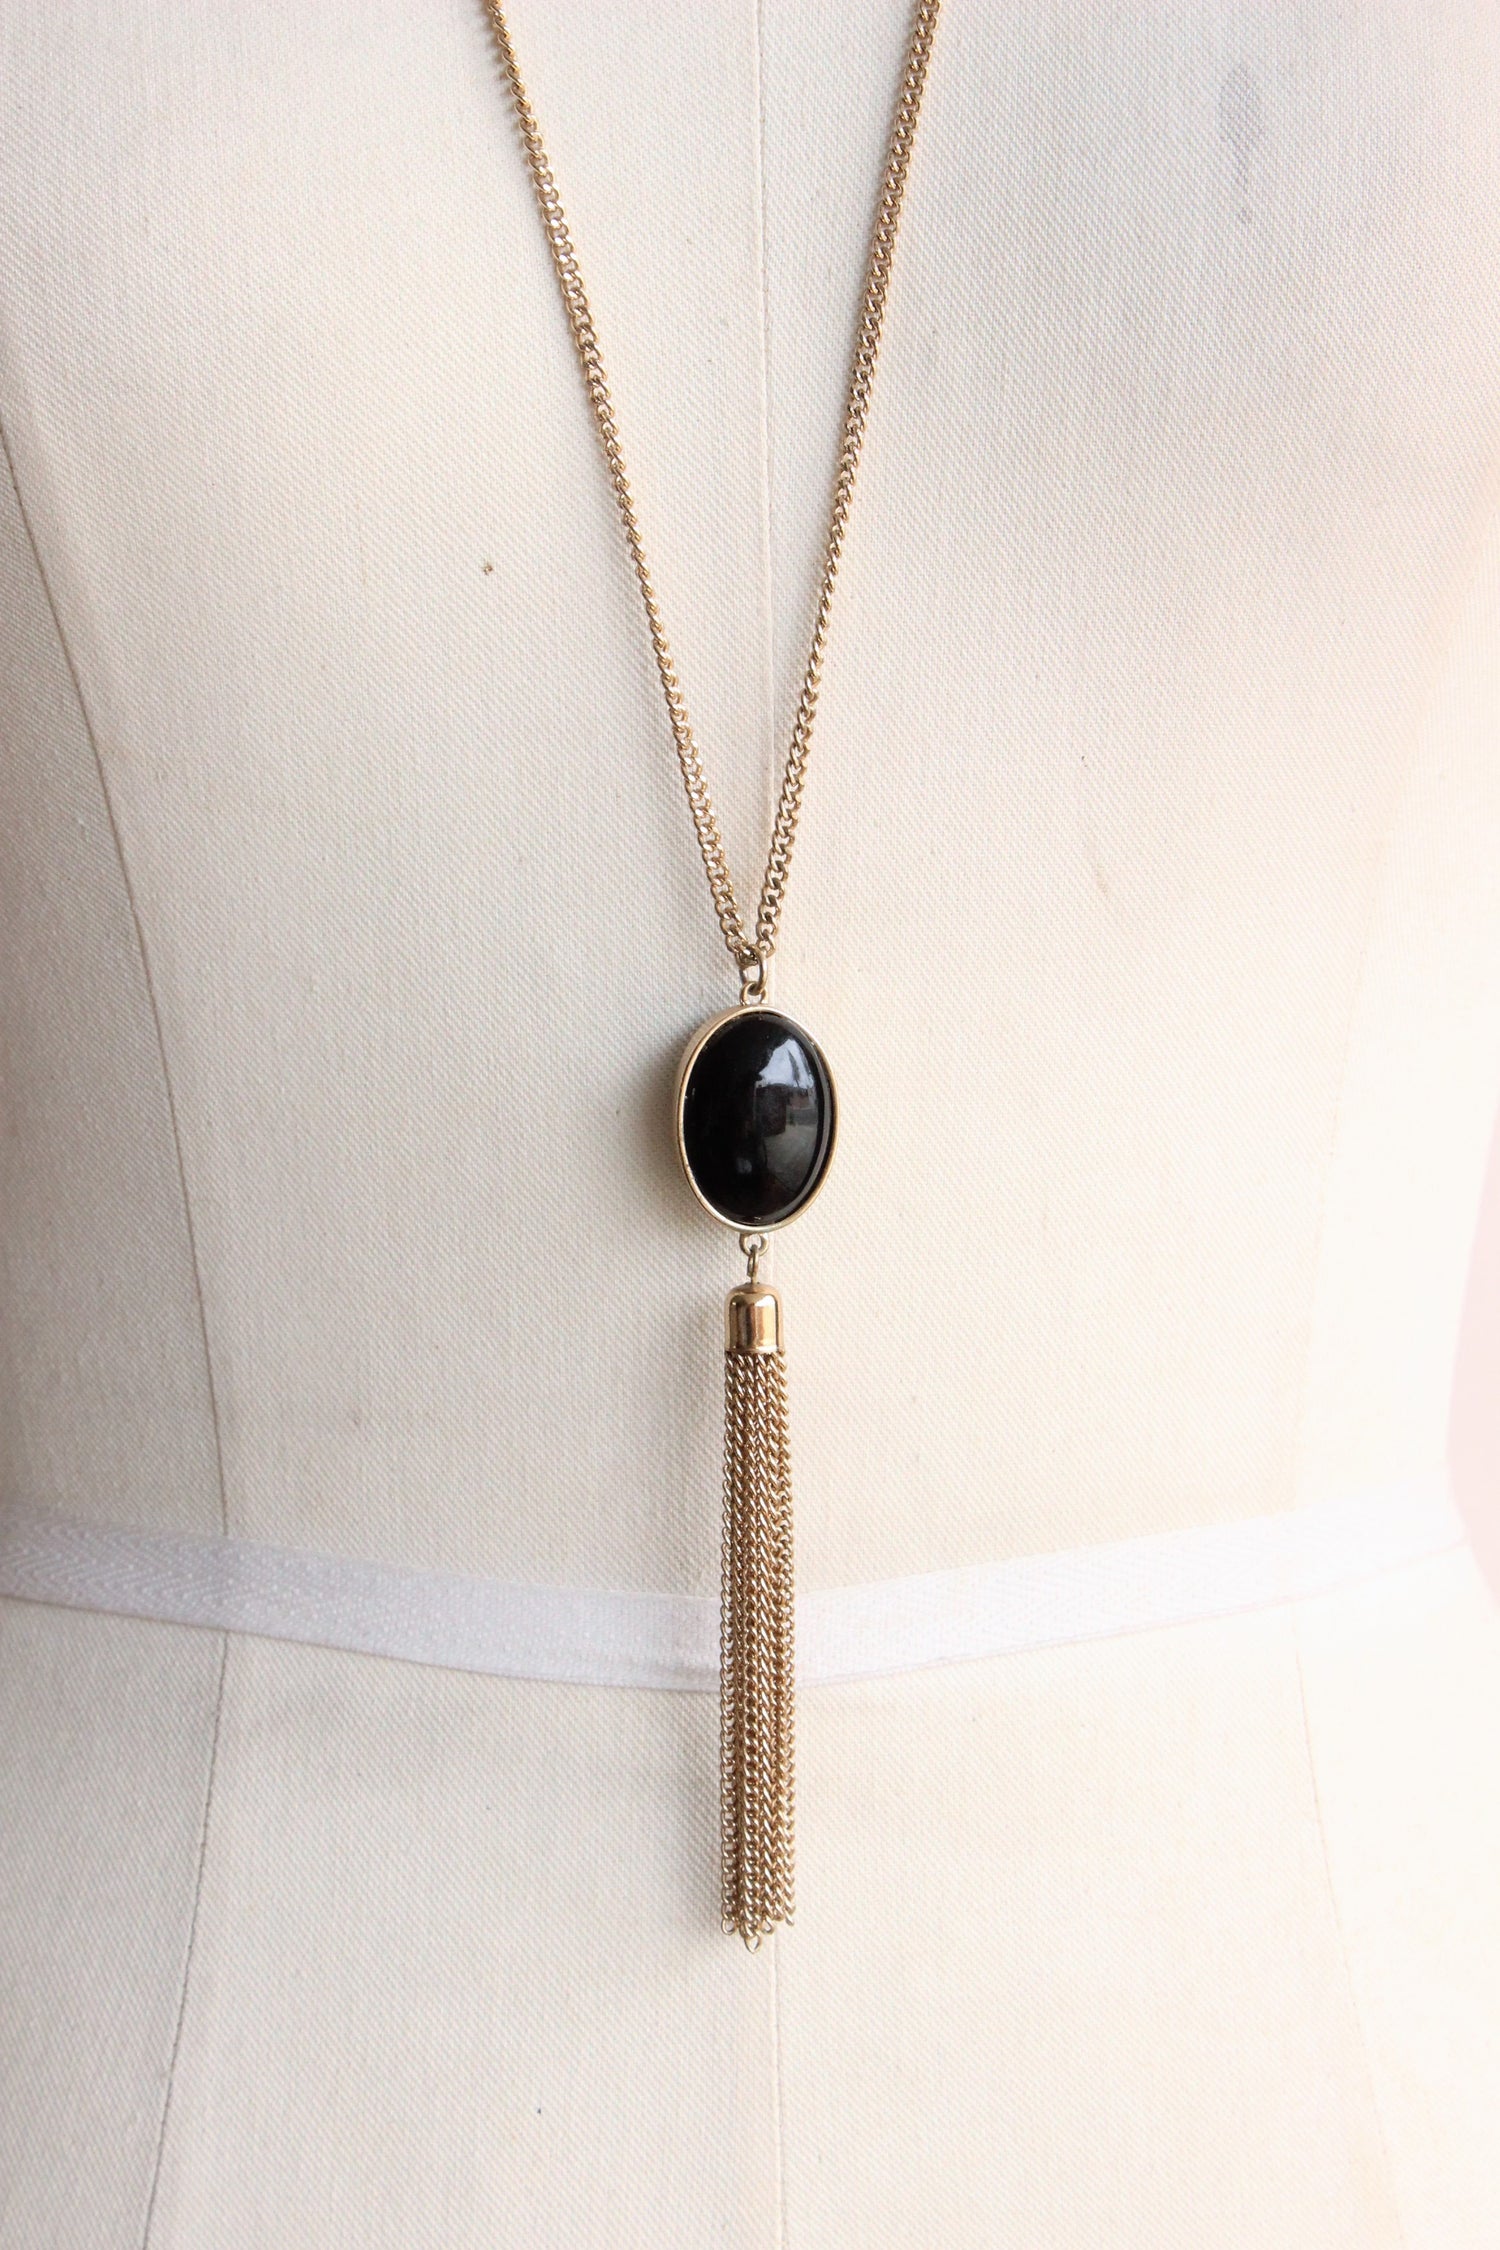 Vintage 1990s Necklace, Black Cabochon With Gold Chain Tassel